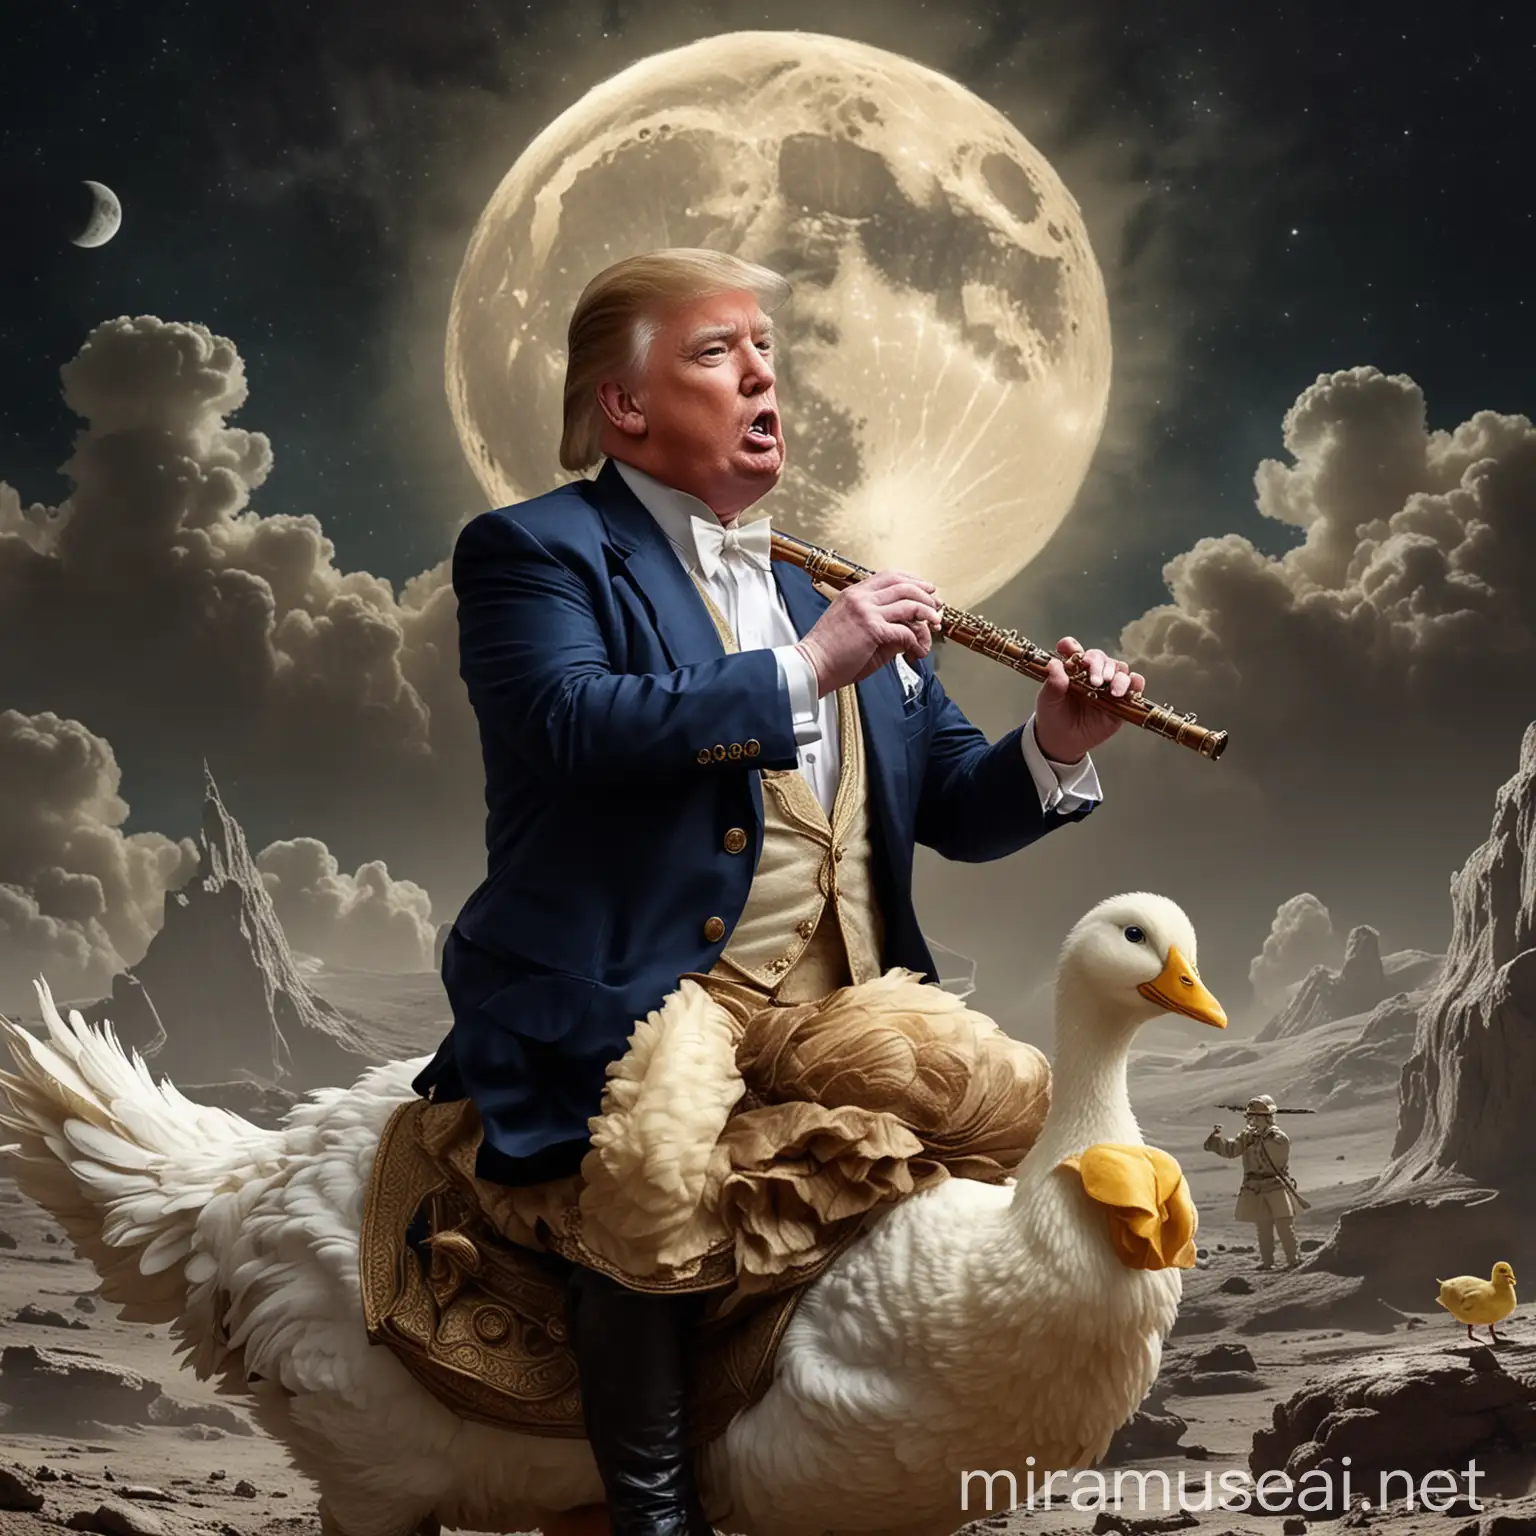 Donald trump plays the flute on the moon in the 18th century while riding a duck